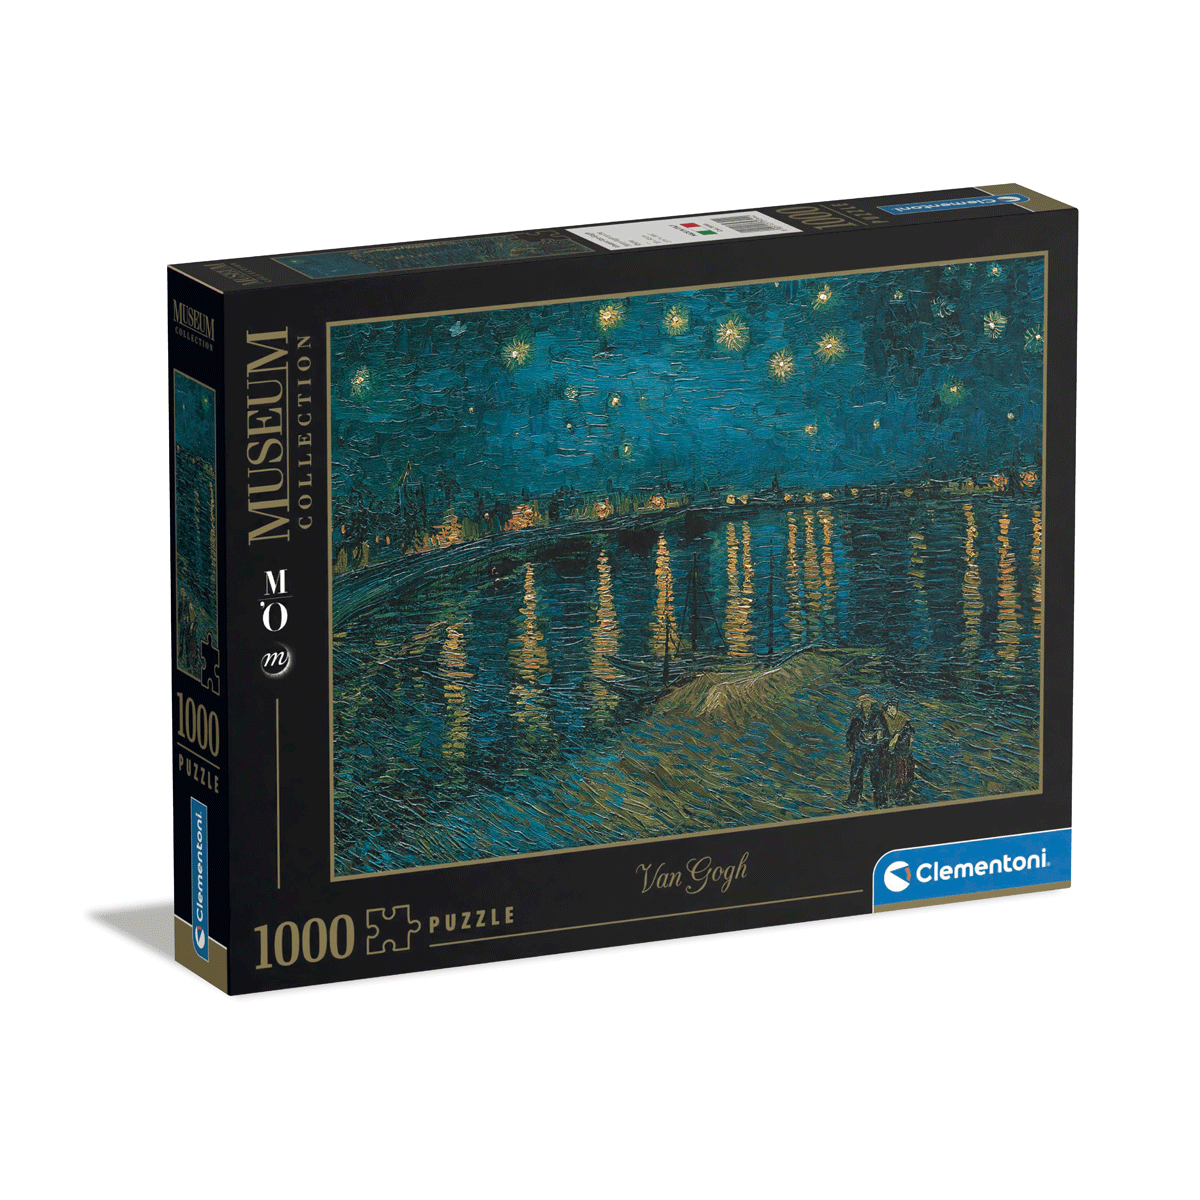 Clementoni puzzle museum collection - van gogh, "starry night over the rhone" - 1000 pezzi, puzzle adulti - CLEMENTONI